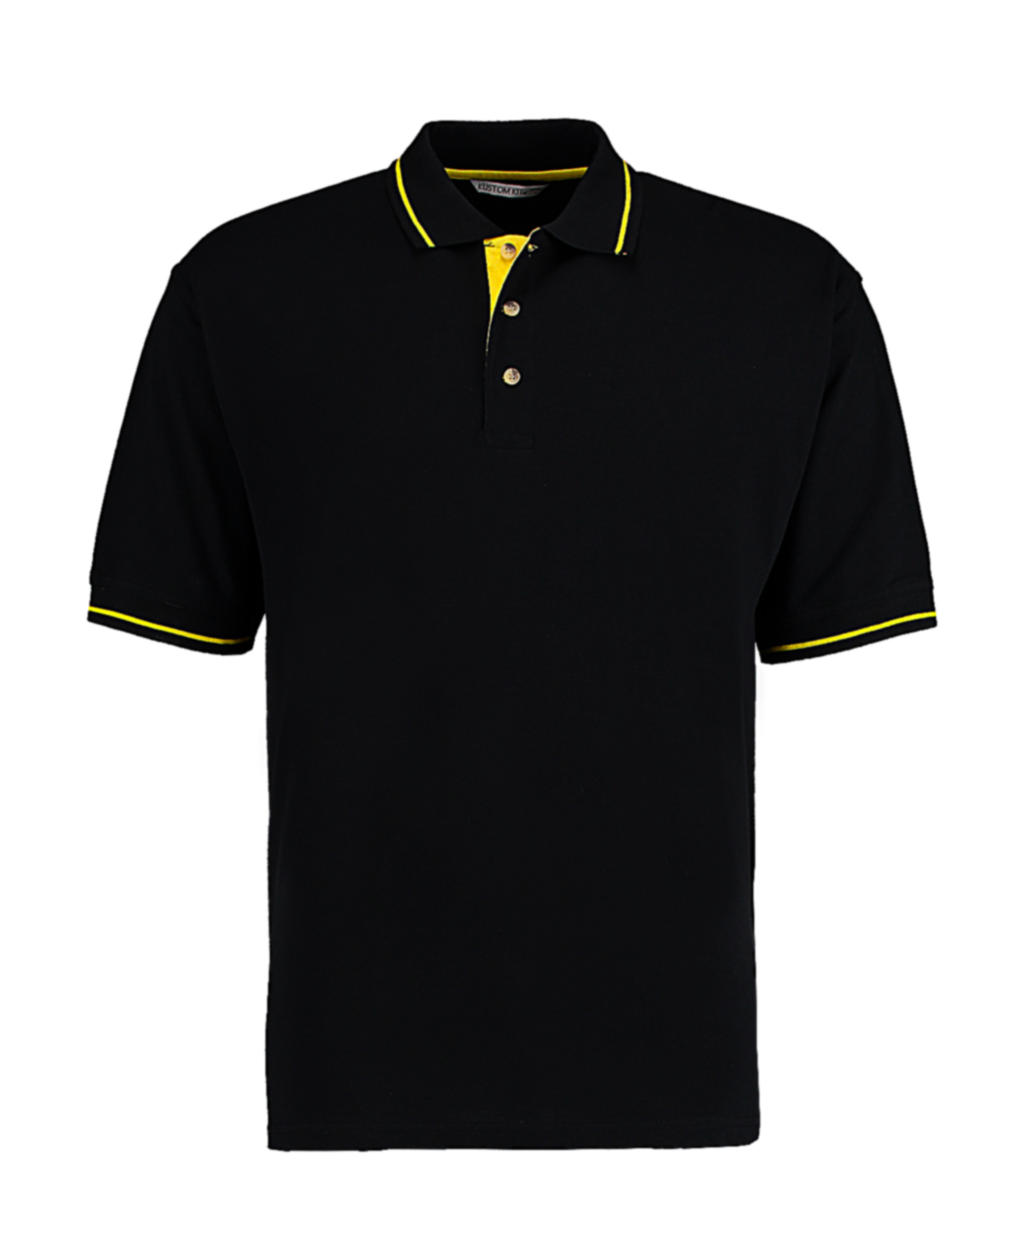  Mens Classic Fit St. Mellion Polo in Farbe Black/Yellow